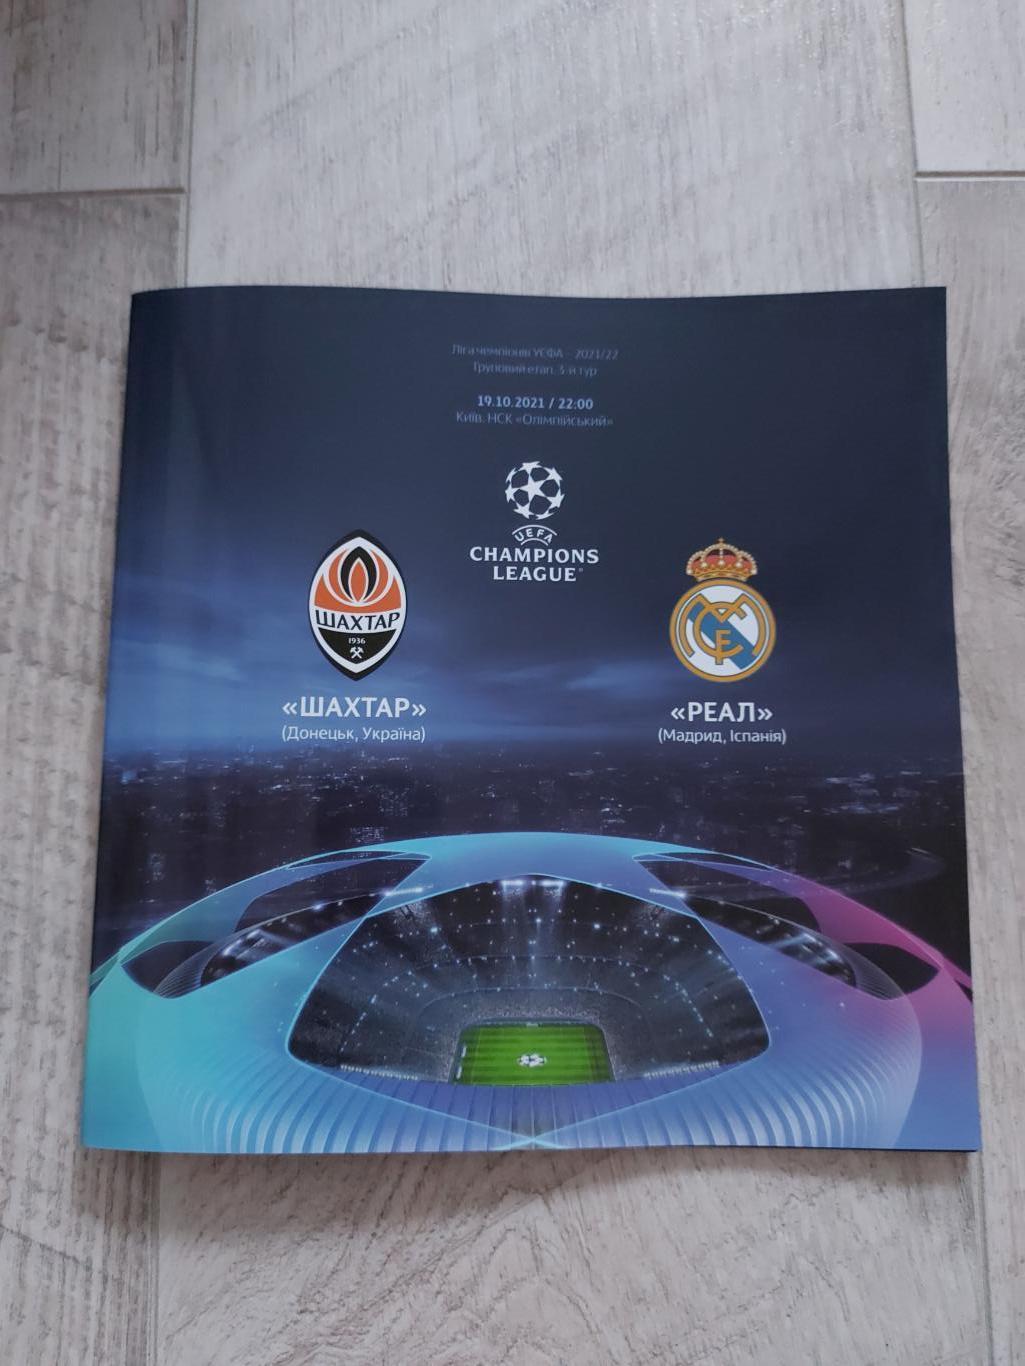 Шахтар - Реал, Shakhtar - Real 2021